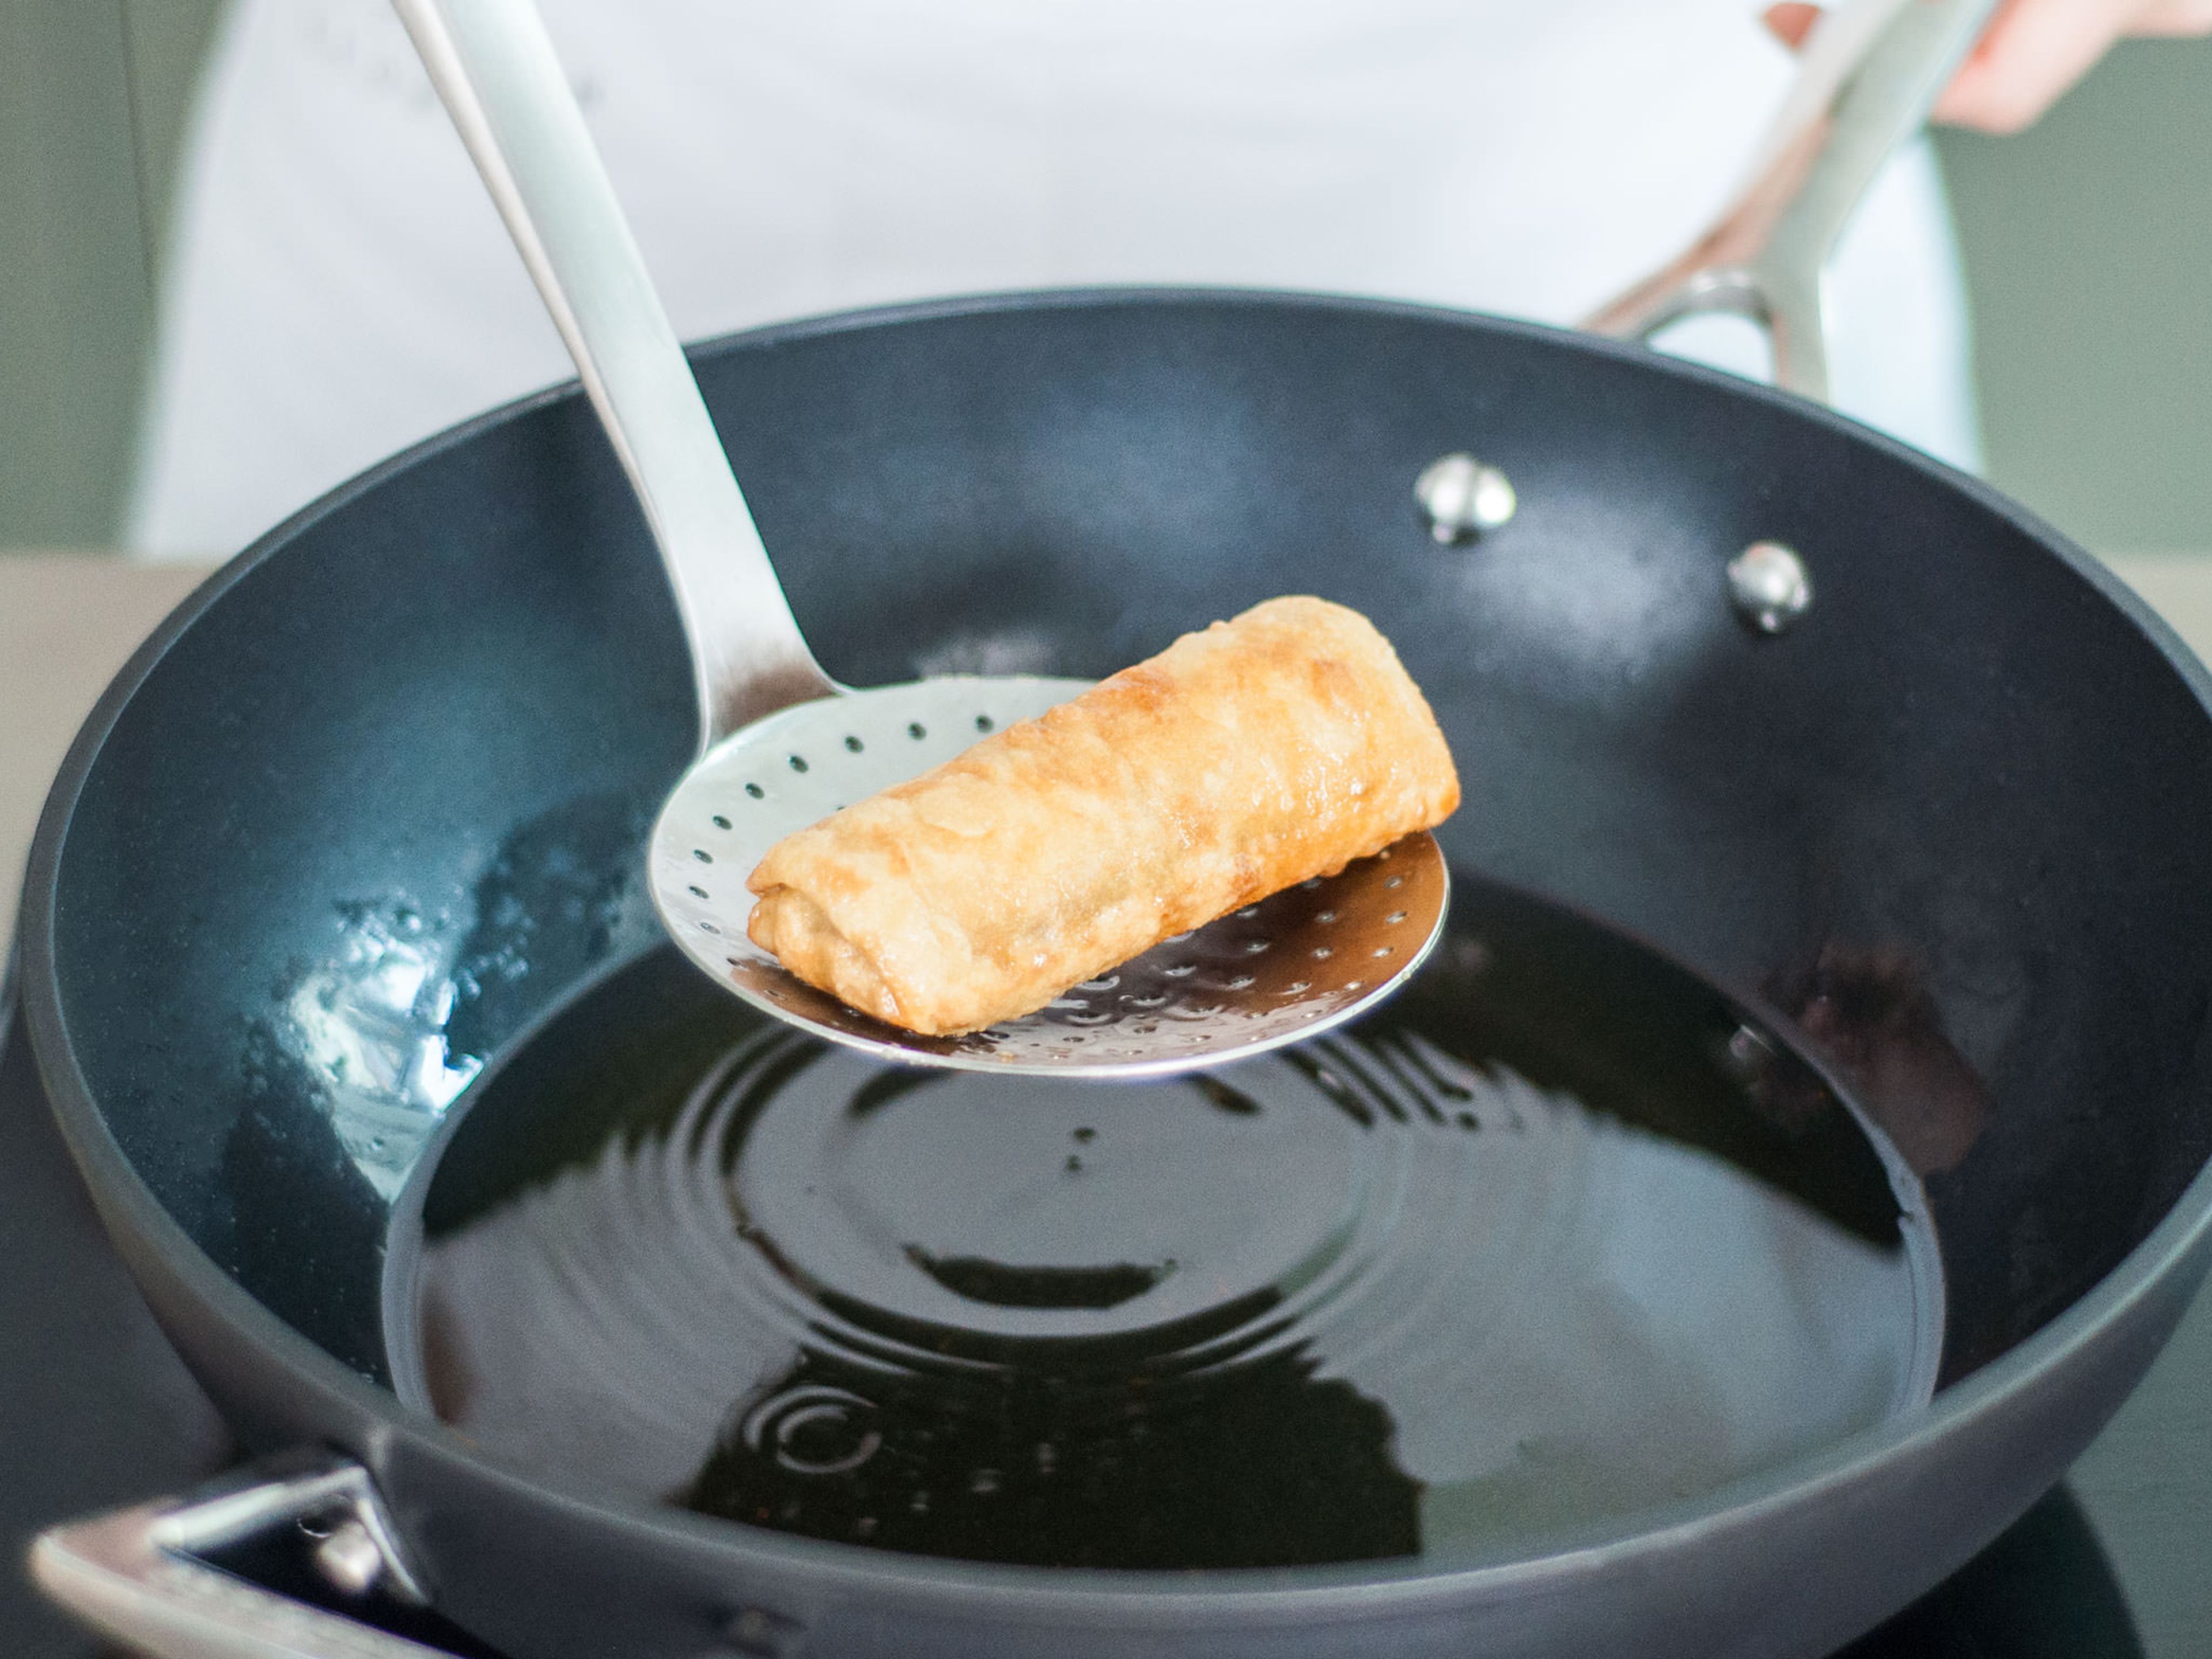 Heat oil in a deep pan and fry for approx. 3 – 4 min. until golden brown. Degrease on paper towels. Enjoy!